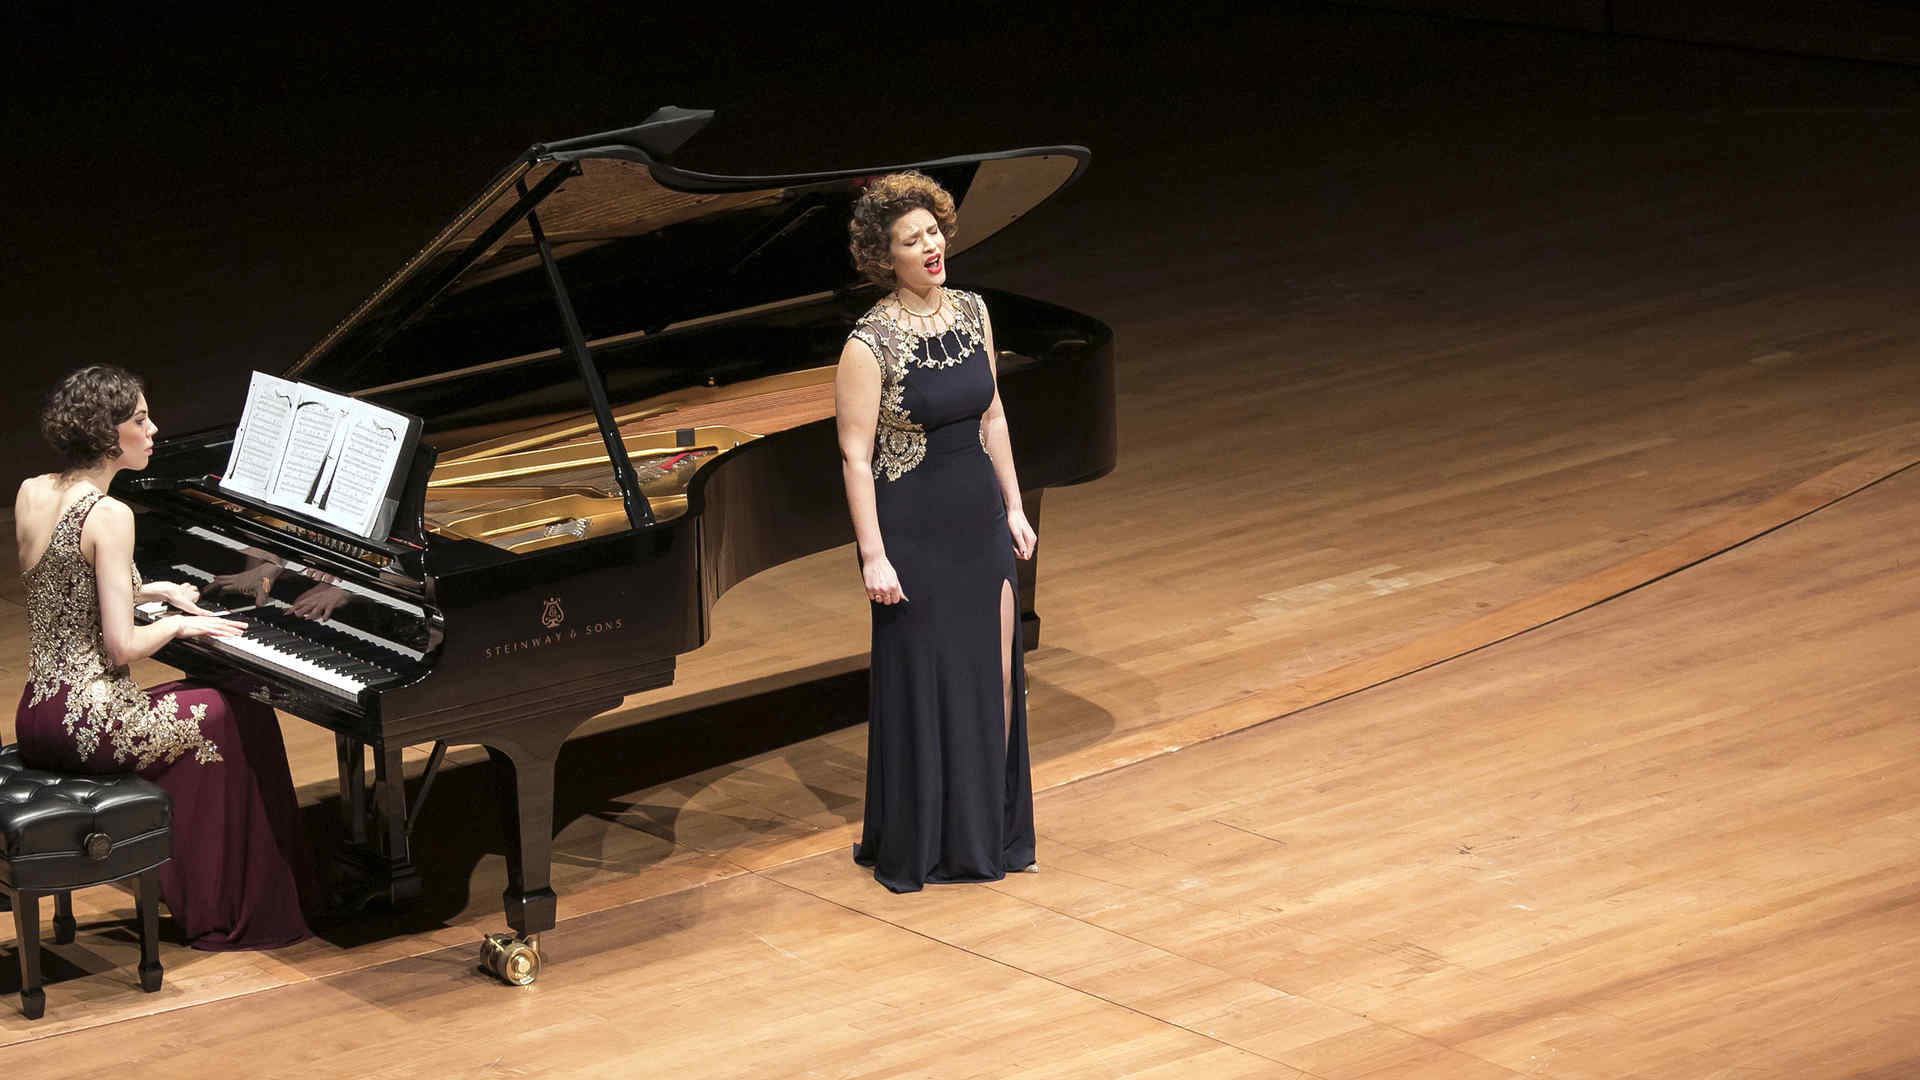 Collaborative pianist Bronwyn Schuman is at the piano accompanying a singer during a recital on stage